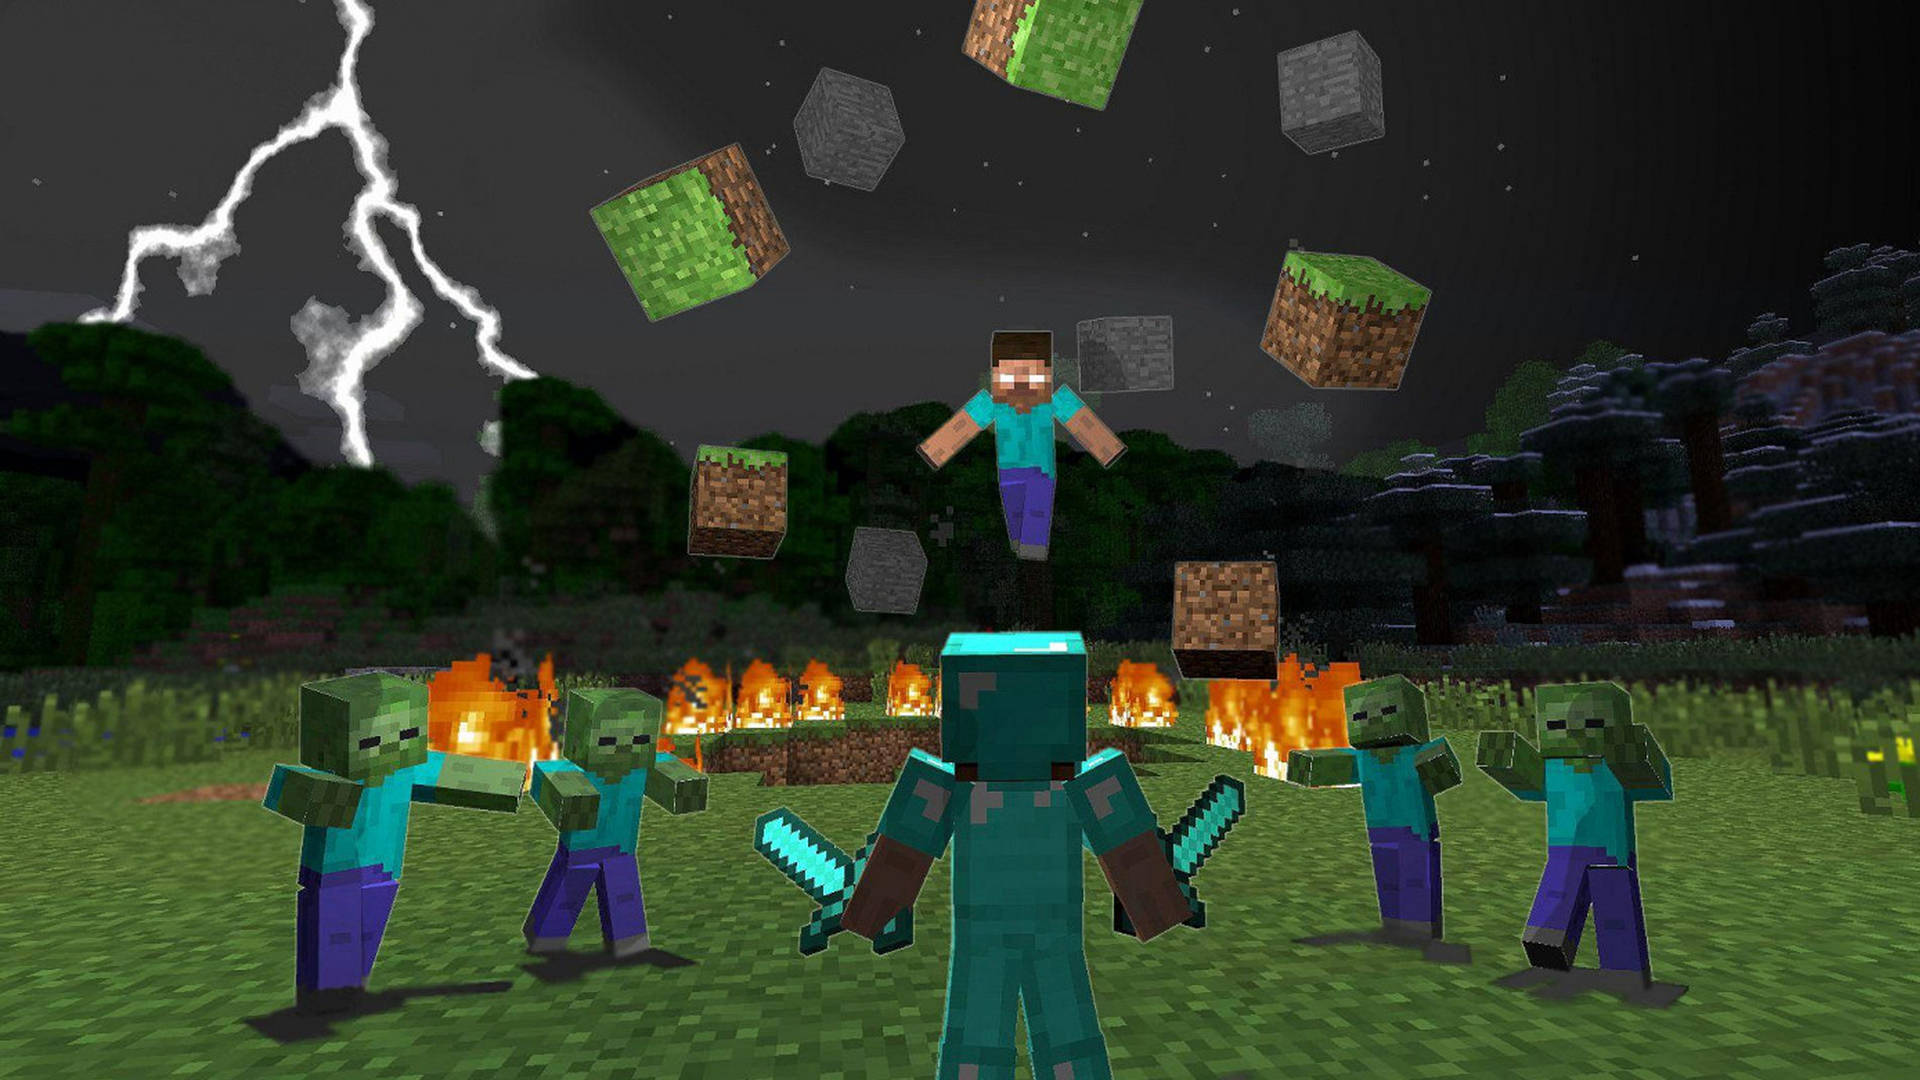 Download Steve With Two Diamond Swords 2560x1440 Minecraft Wallpaper |  